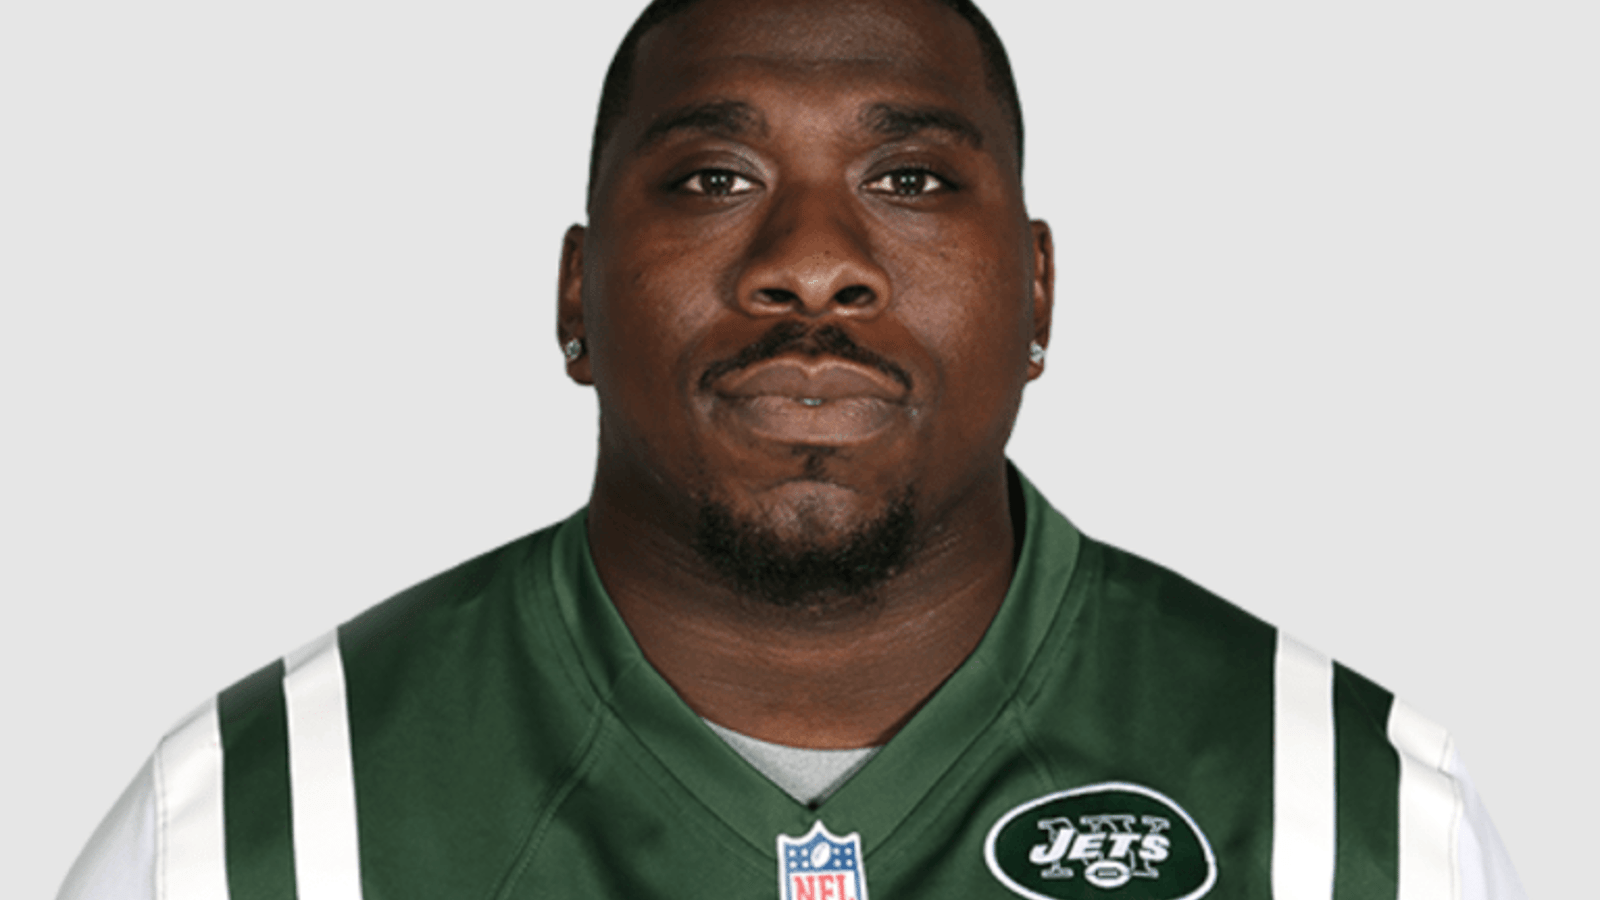 VIDEO EX-NFL player wanted for assault on his ex-girlfriend